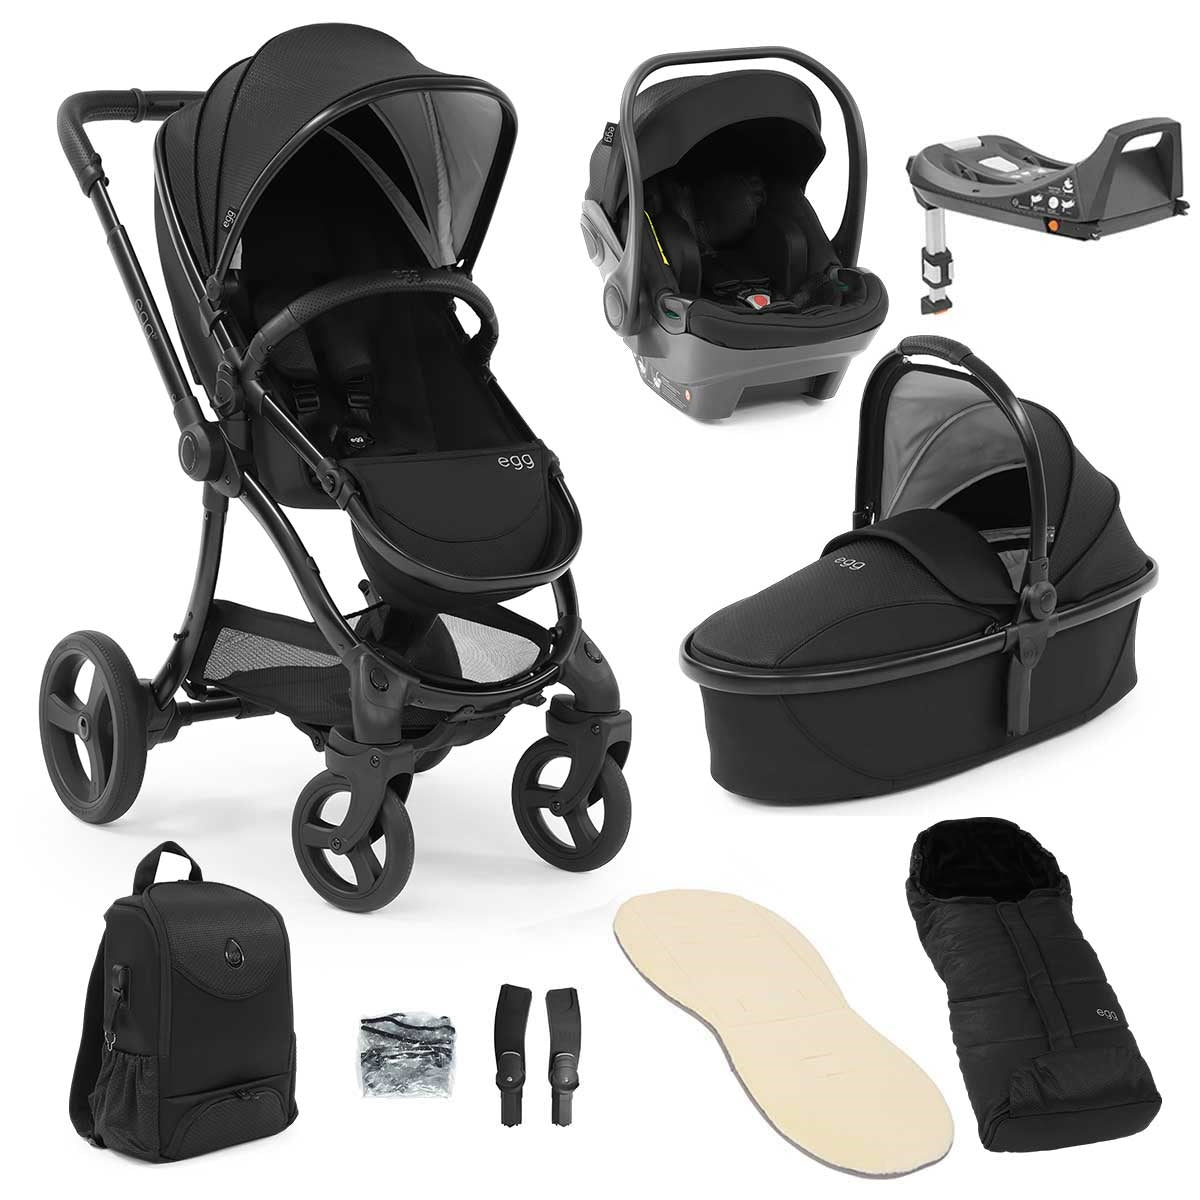 Egg 2 Luxury i-Size Travel System Bundle, Special Edition Eclipse